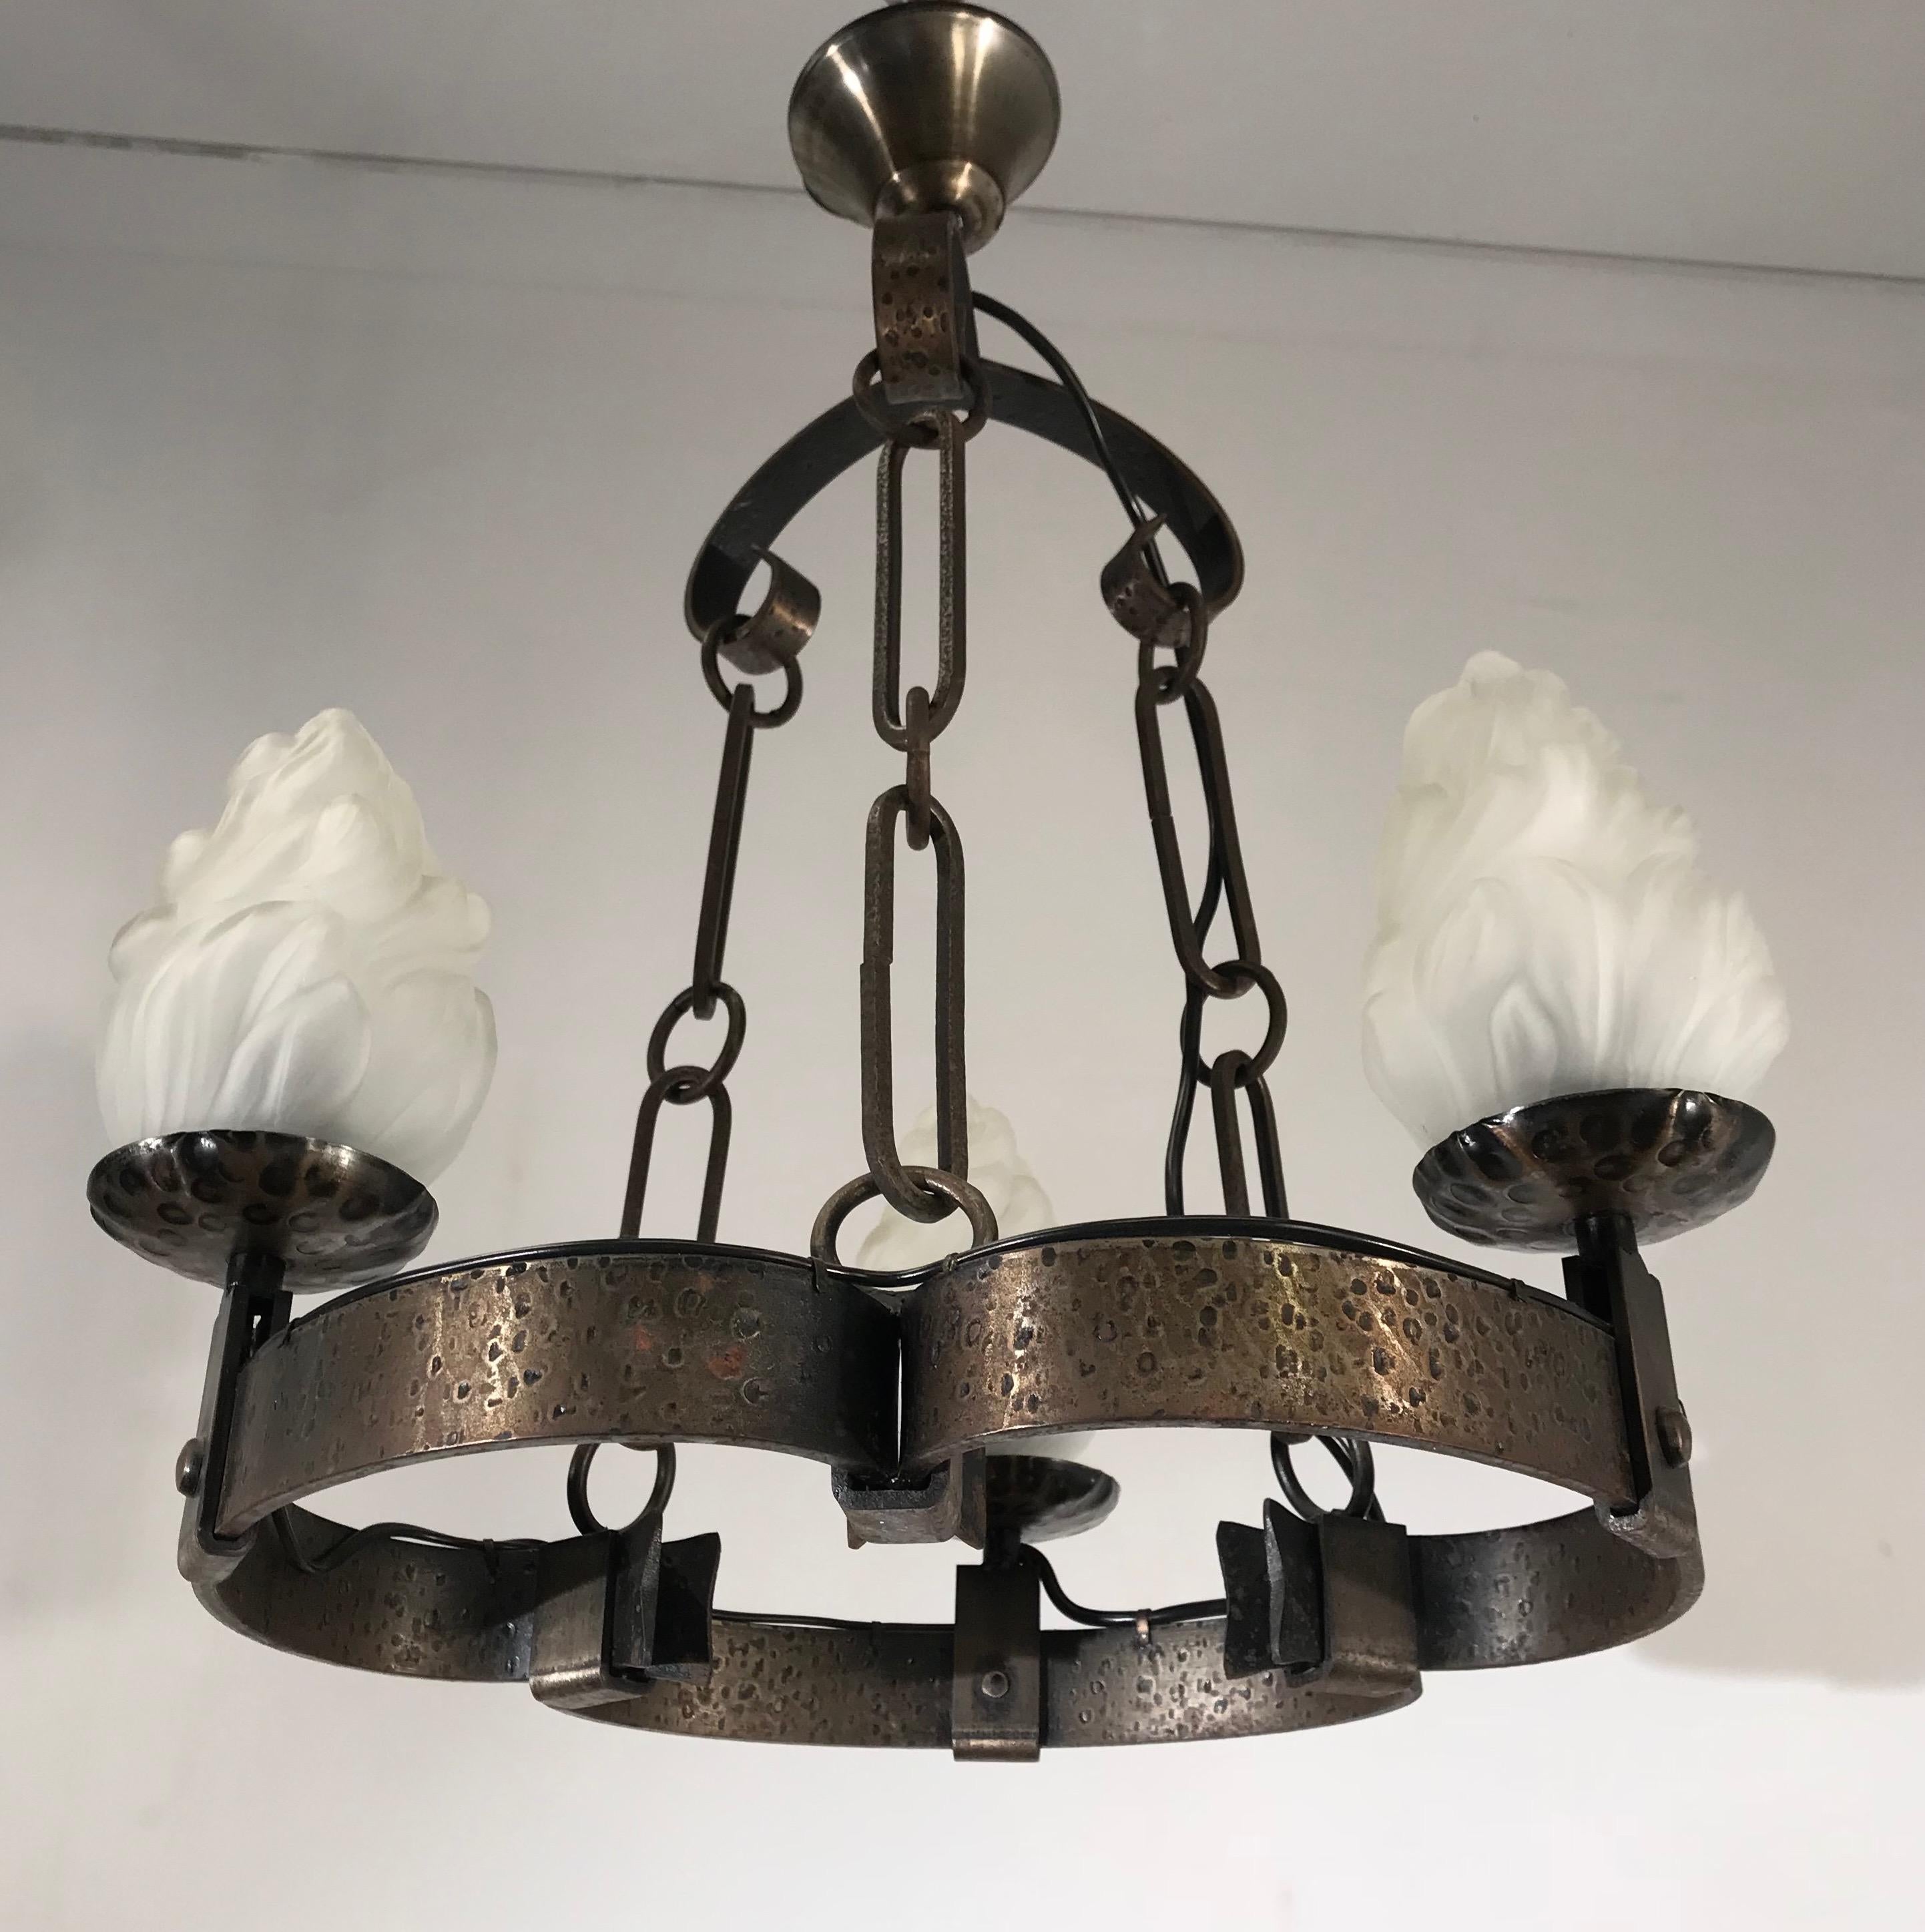 Hand-Crafted Arts & Crafts Hand-Hammered Wrought Iron Castle or Wine Cellar Pendant Light For Sale